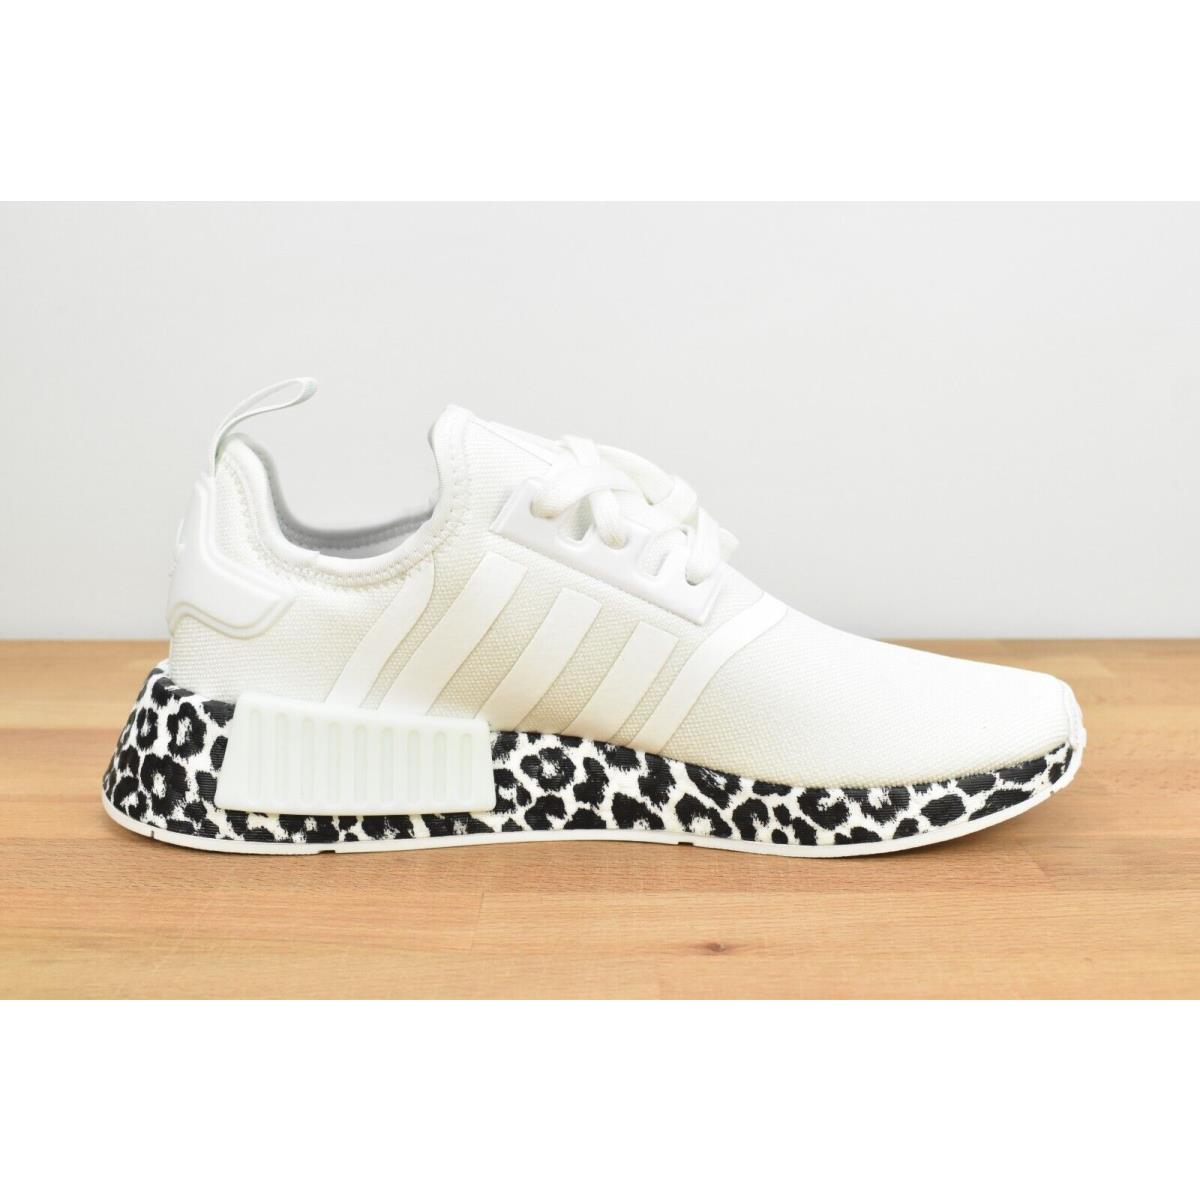 Adidas shoes NMD - White 2